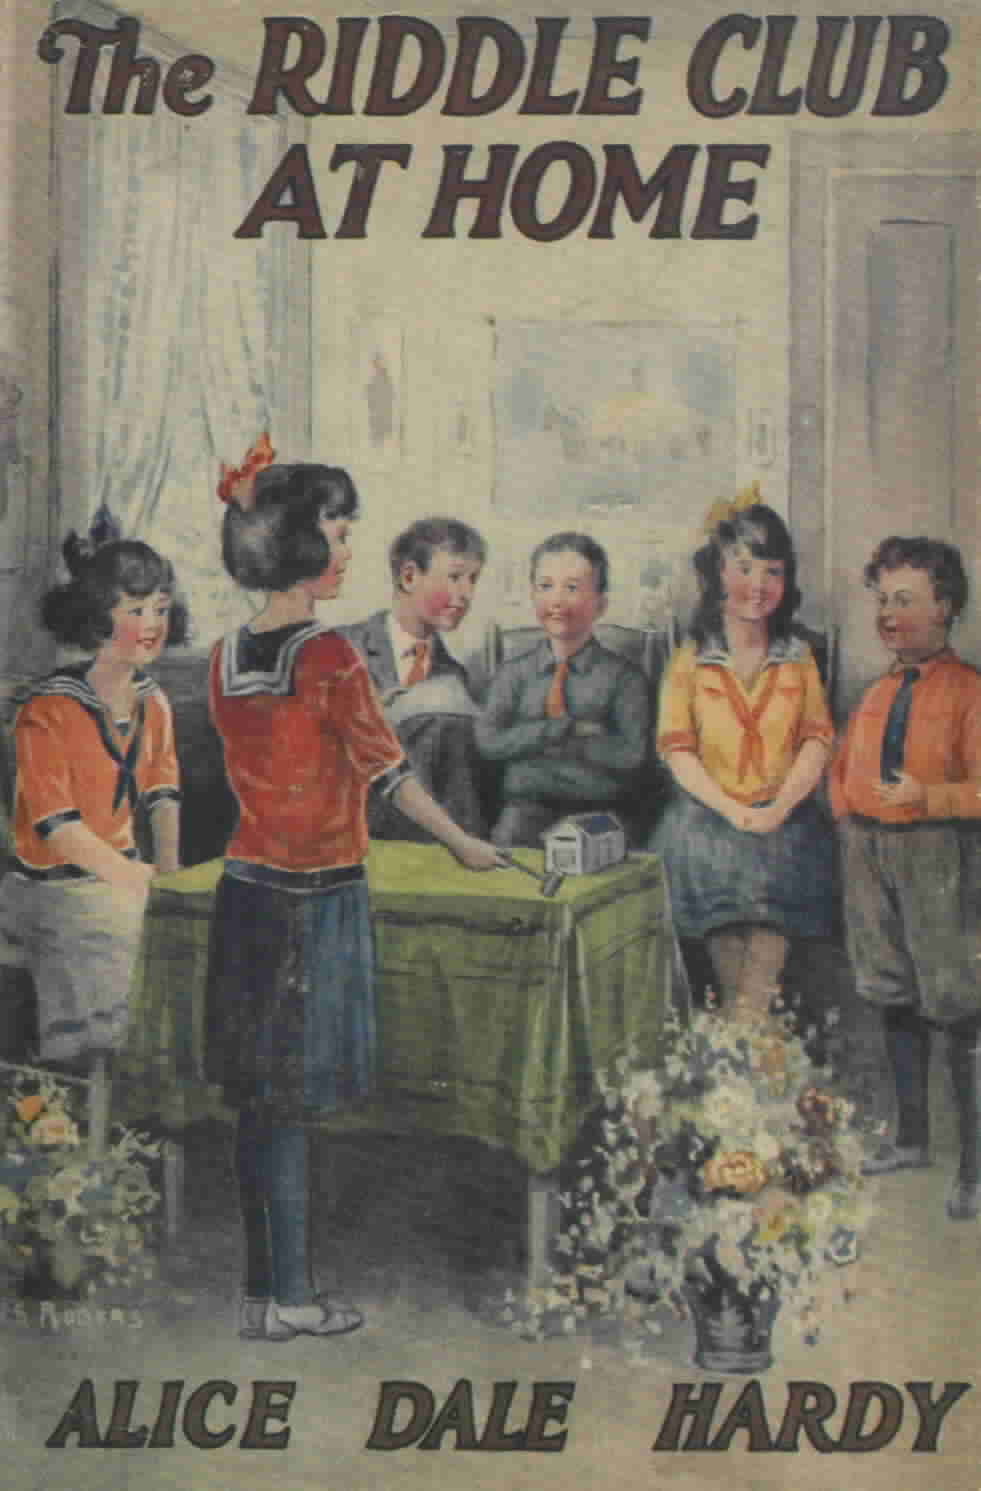 The Riddle Club at Home